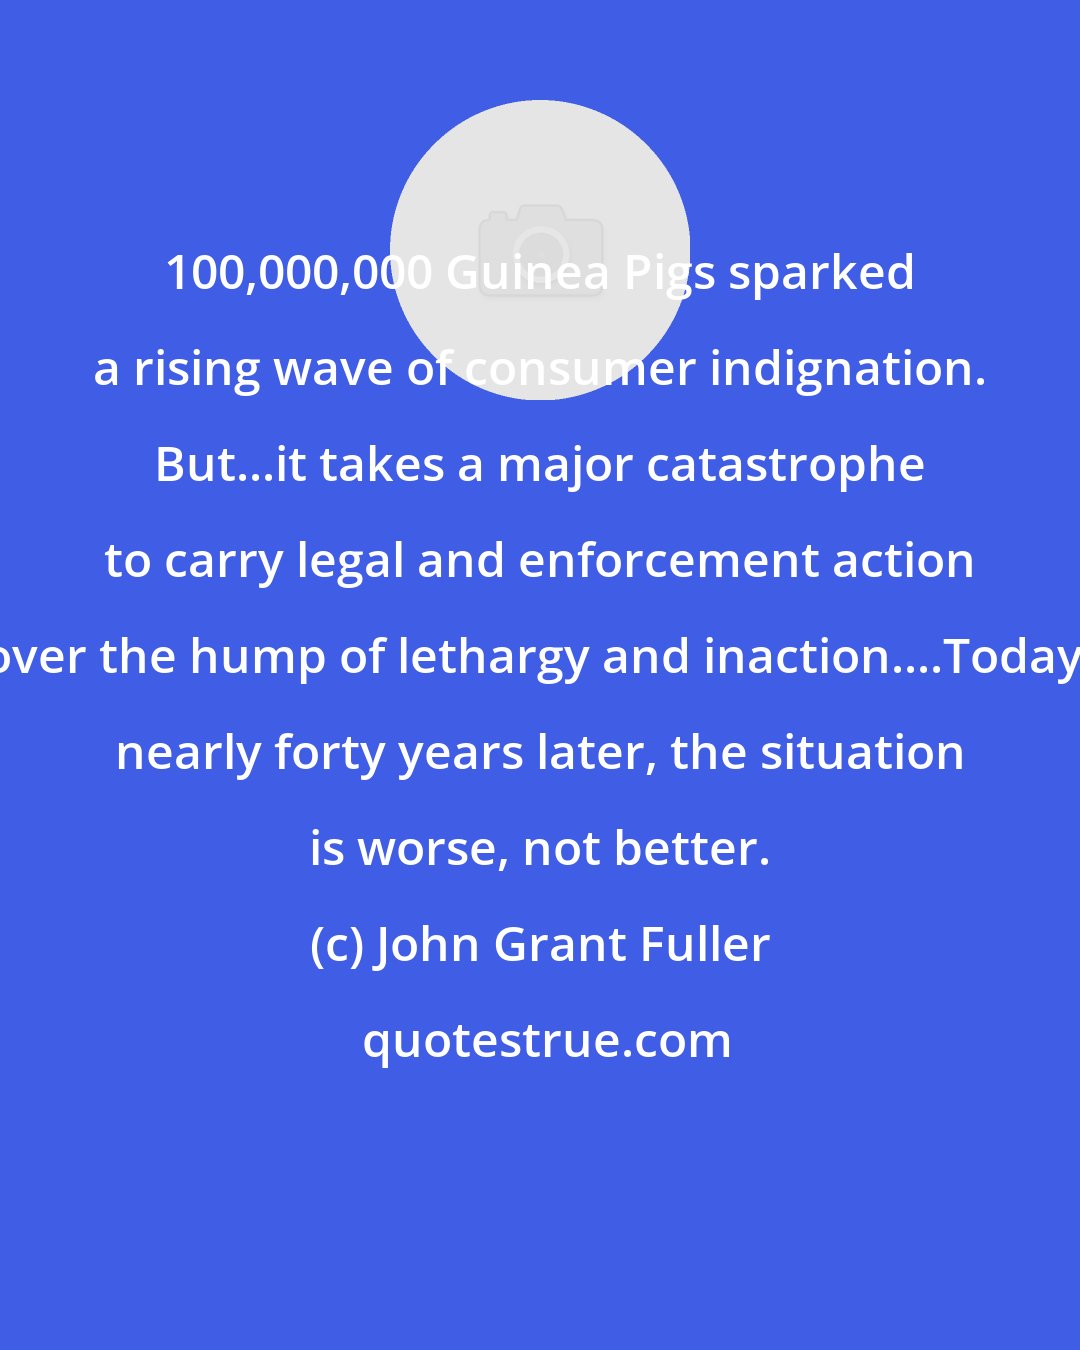 John Grant Fuller: 100,000,000 Guinea Pigs sparked a rising wave of consumer indignation. But...it takes a major catastrophe to carry legal and enforcement action over the hump of lethargy and inaction....Today, nearly forty years later, the situation is worse, not better.